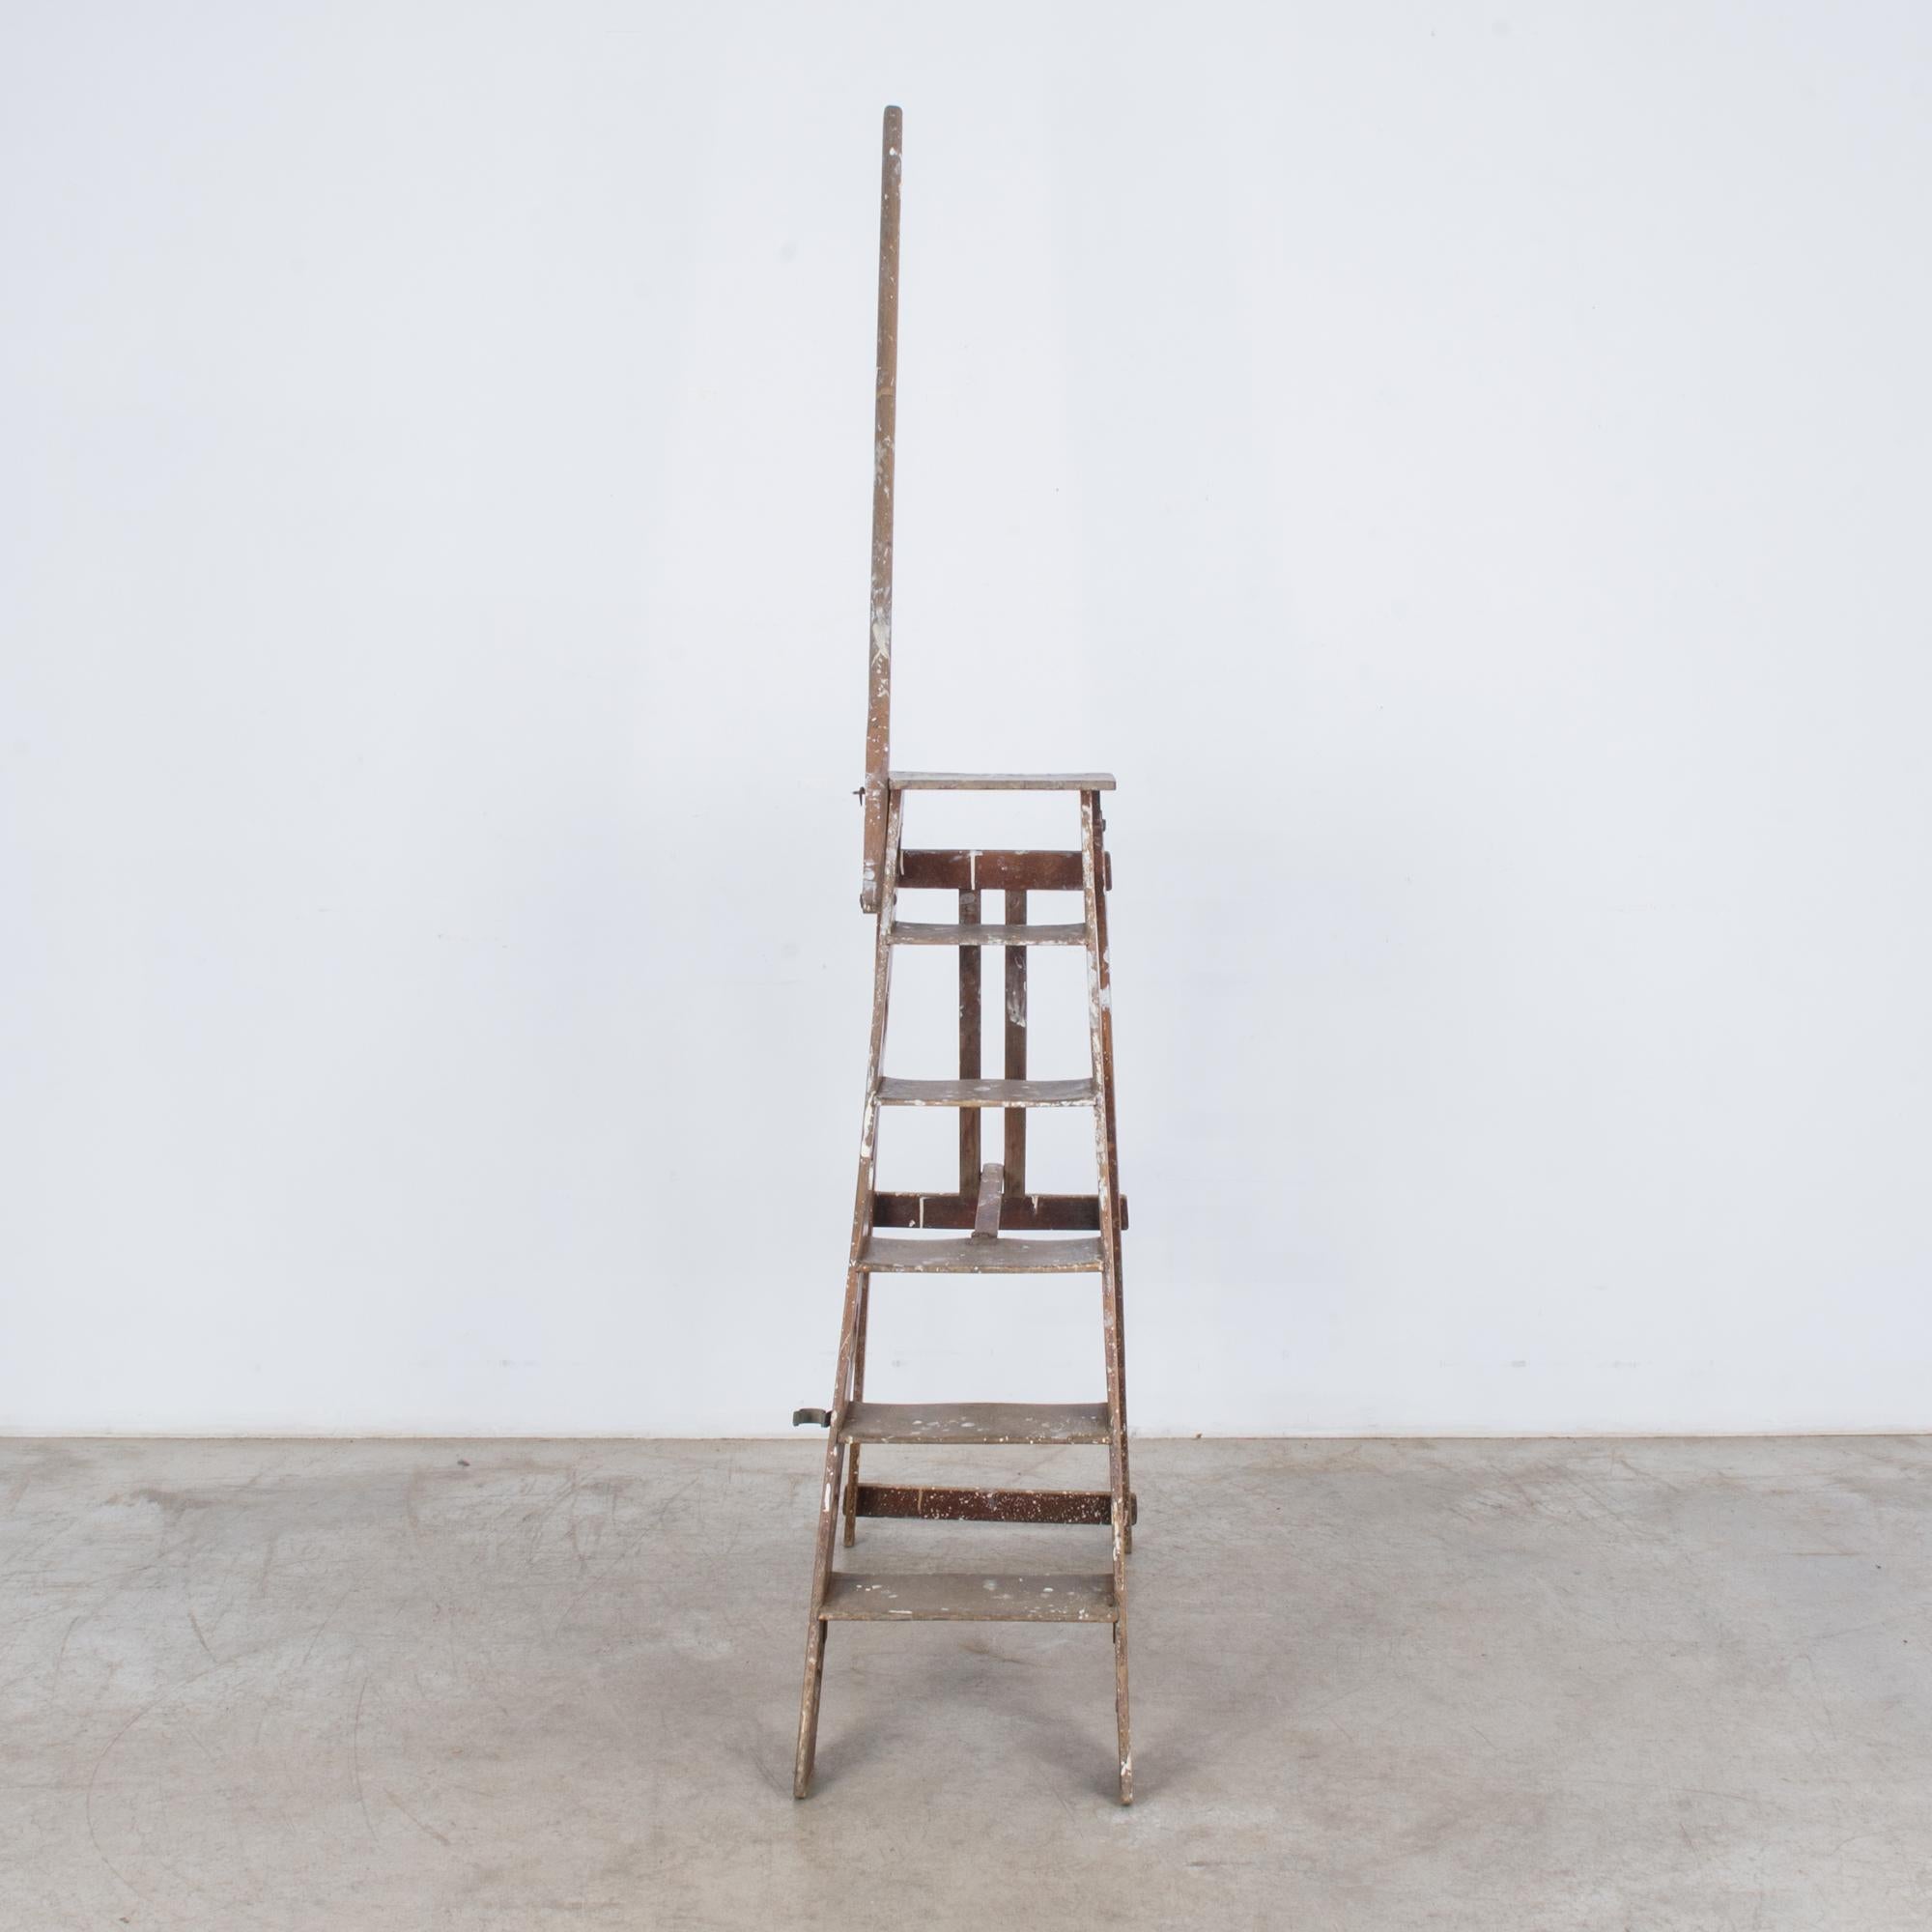 This wooden step ladder was made in France, circa 1900. It features quatrefoil cutouts on the side rails and a long grab pole that can be extended for stability when standing on the upper rungs. The ladder is foldable for easy storage, and white